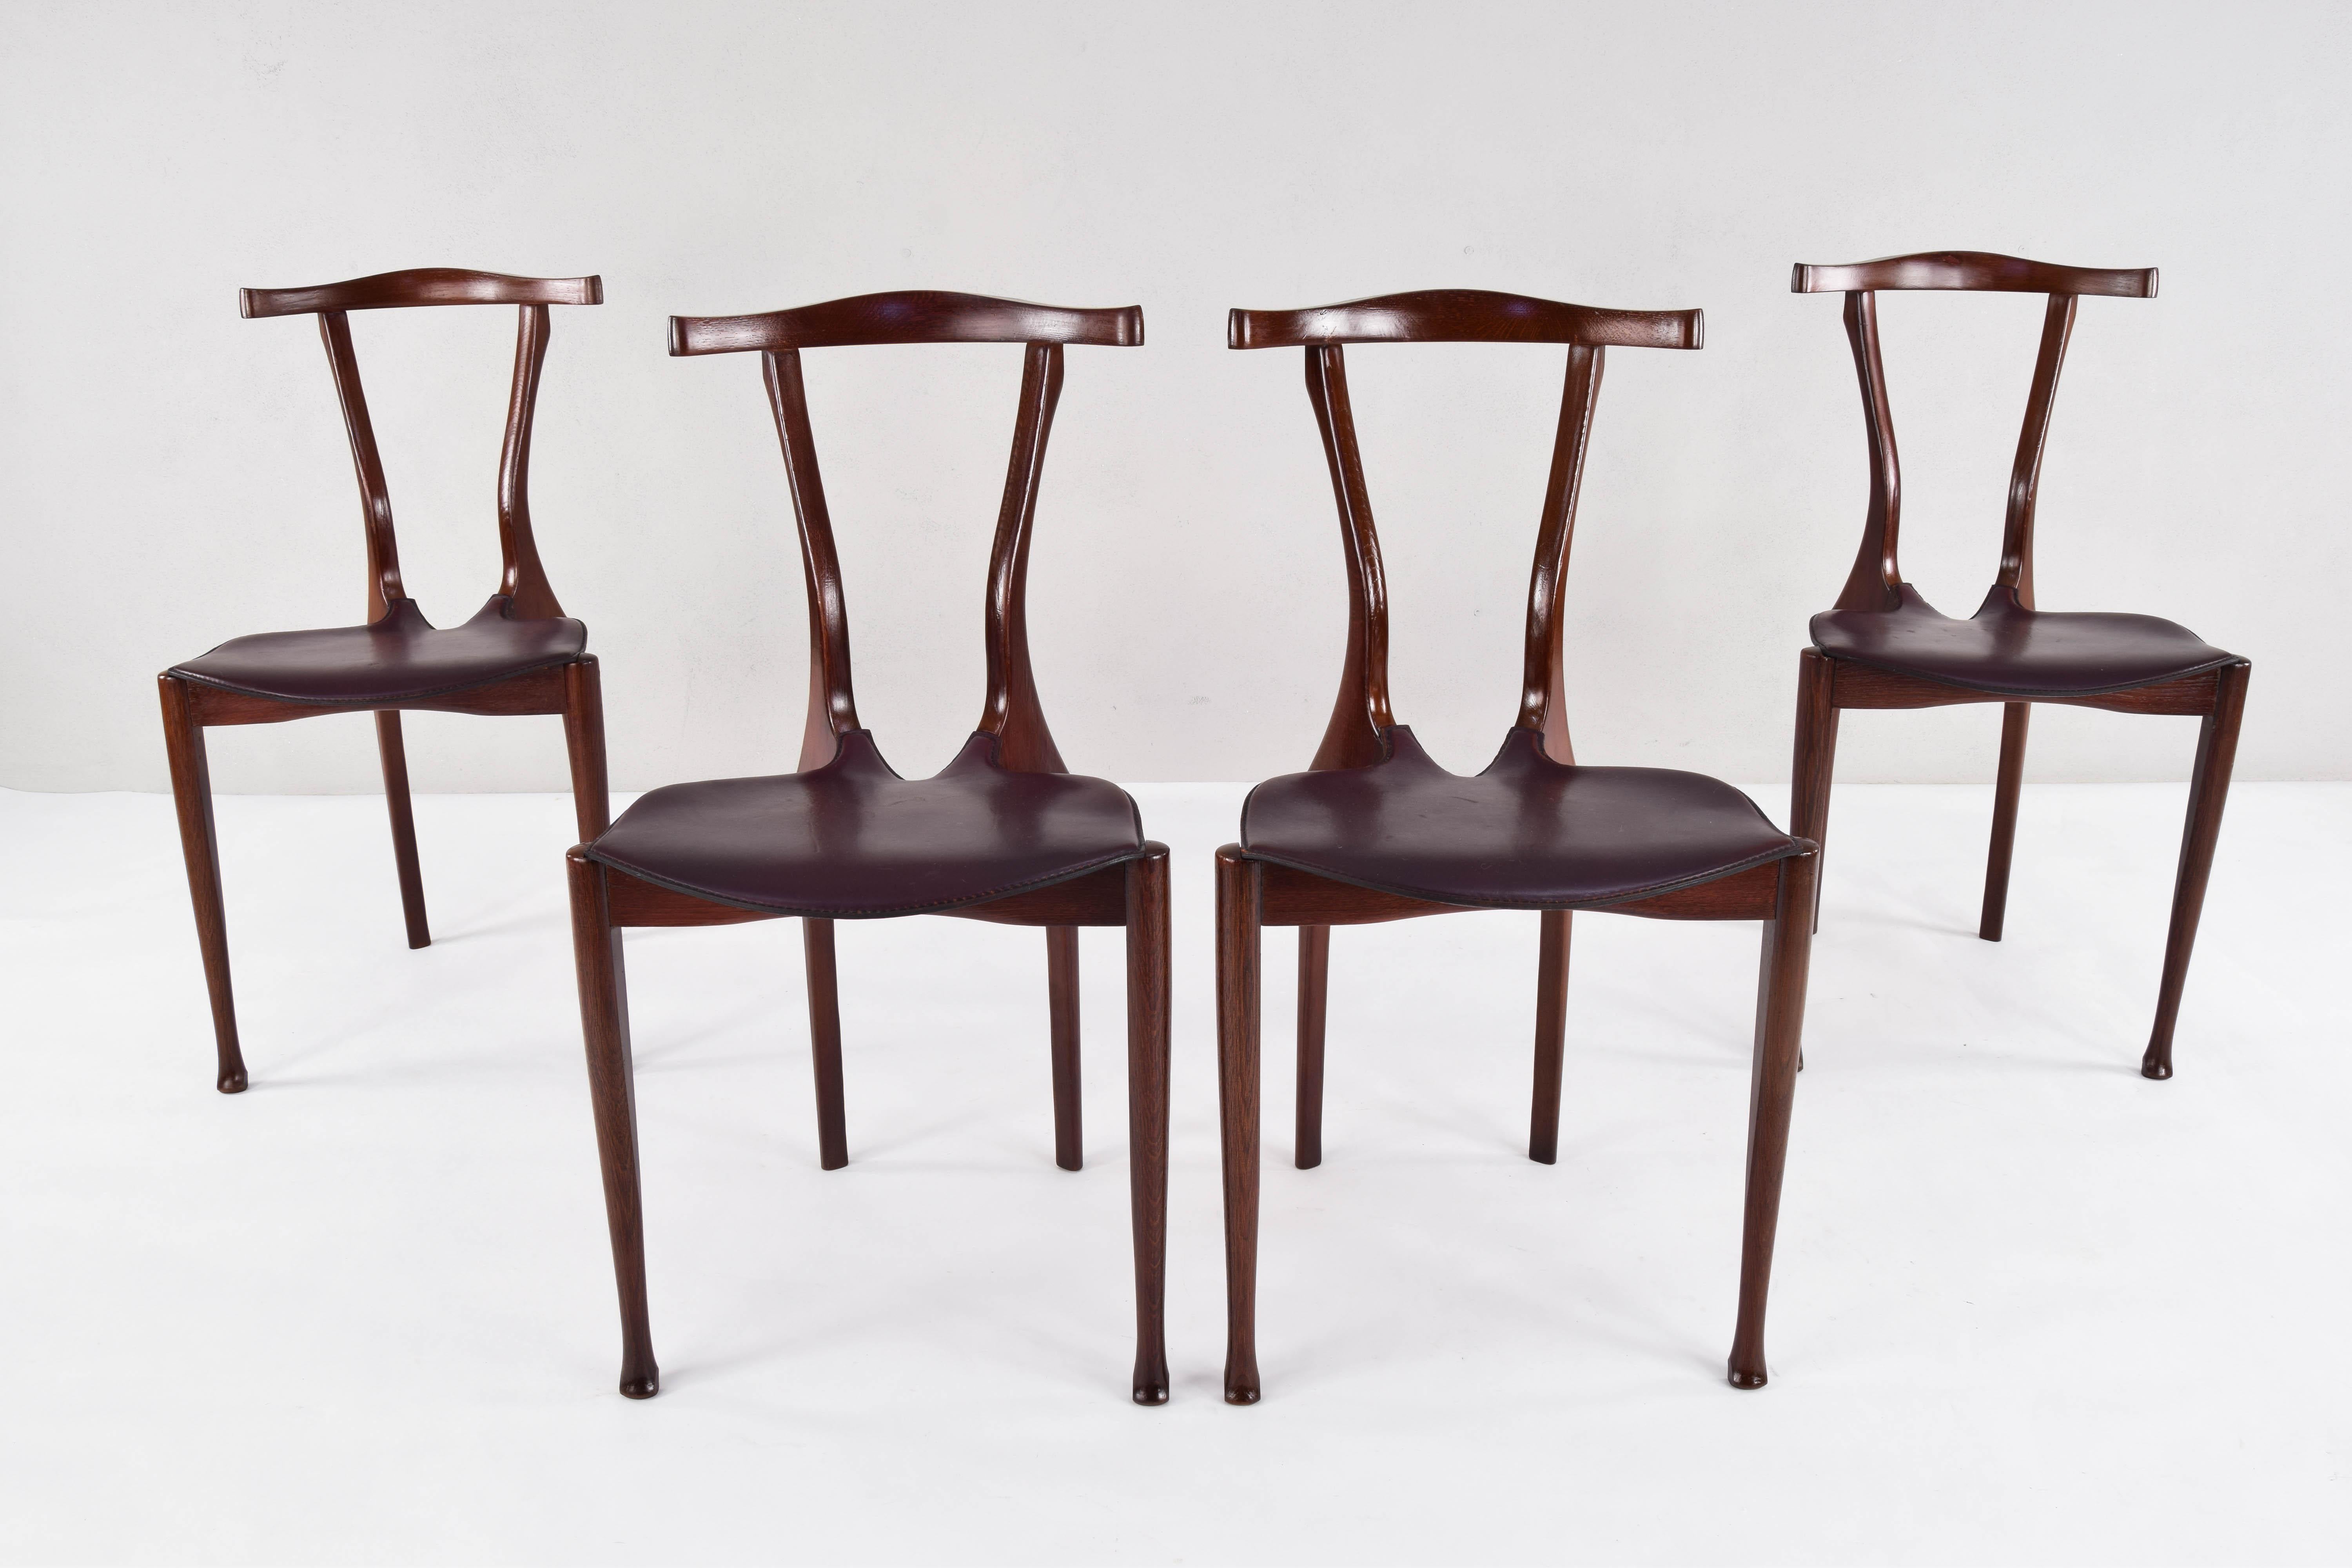 Modern Set of Four First Edition Oscar Tusquets Gaulino Oak and Leather Chairs by Jané